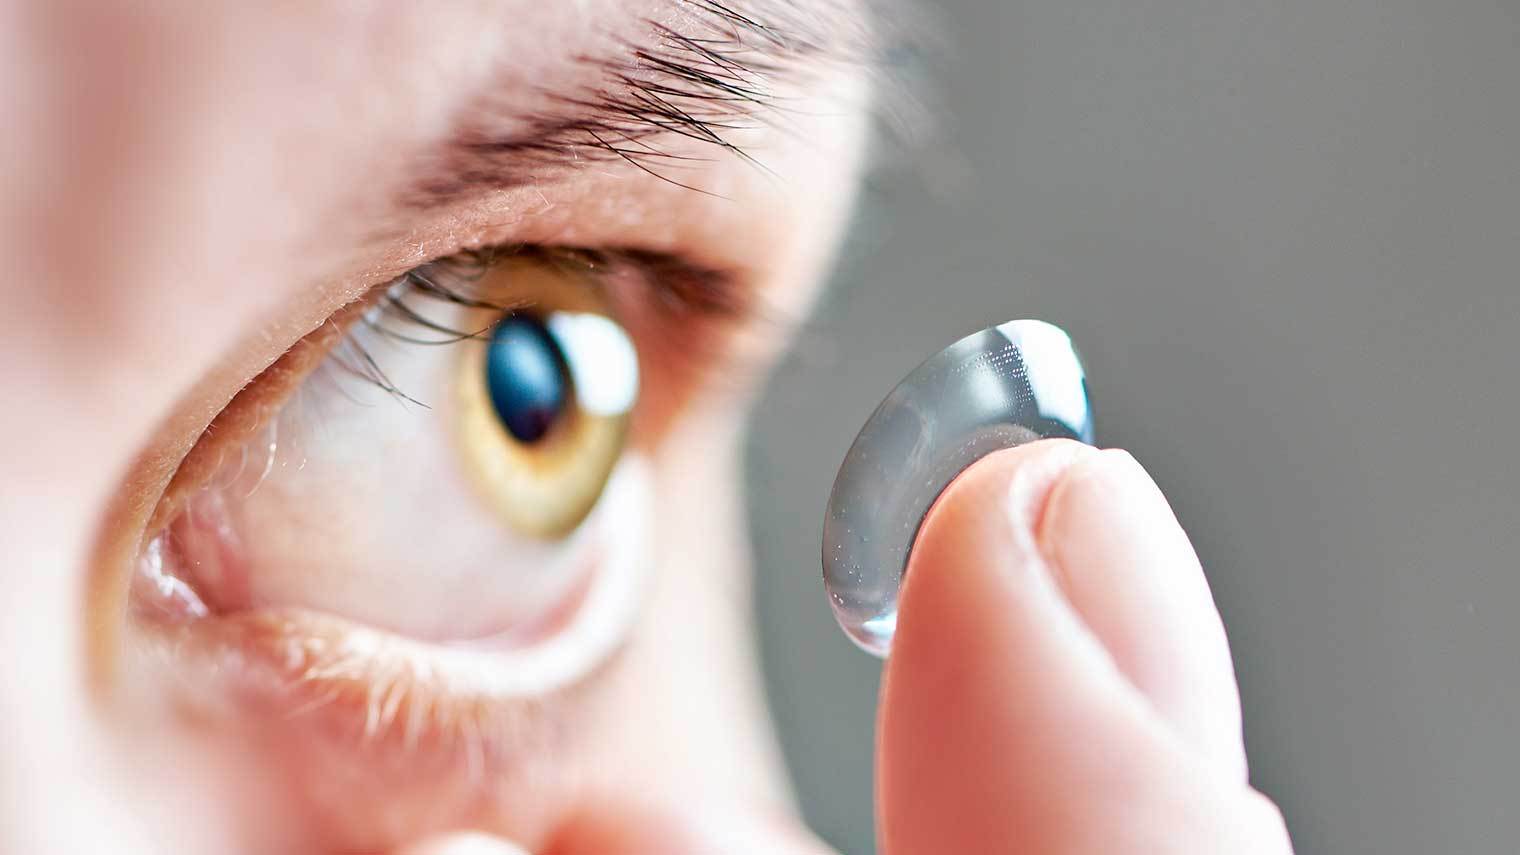 Tips on How to Avoid Low Quality Contact Lens